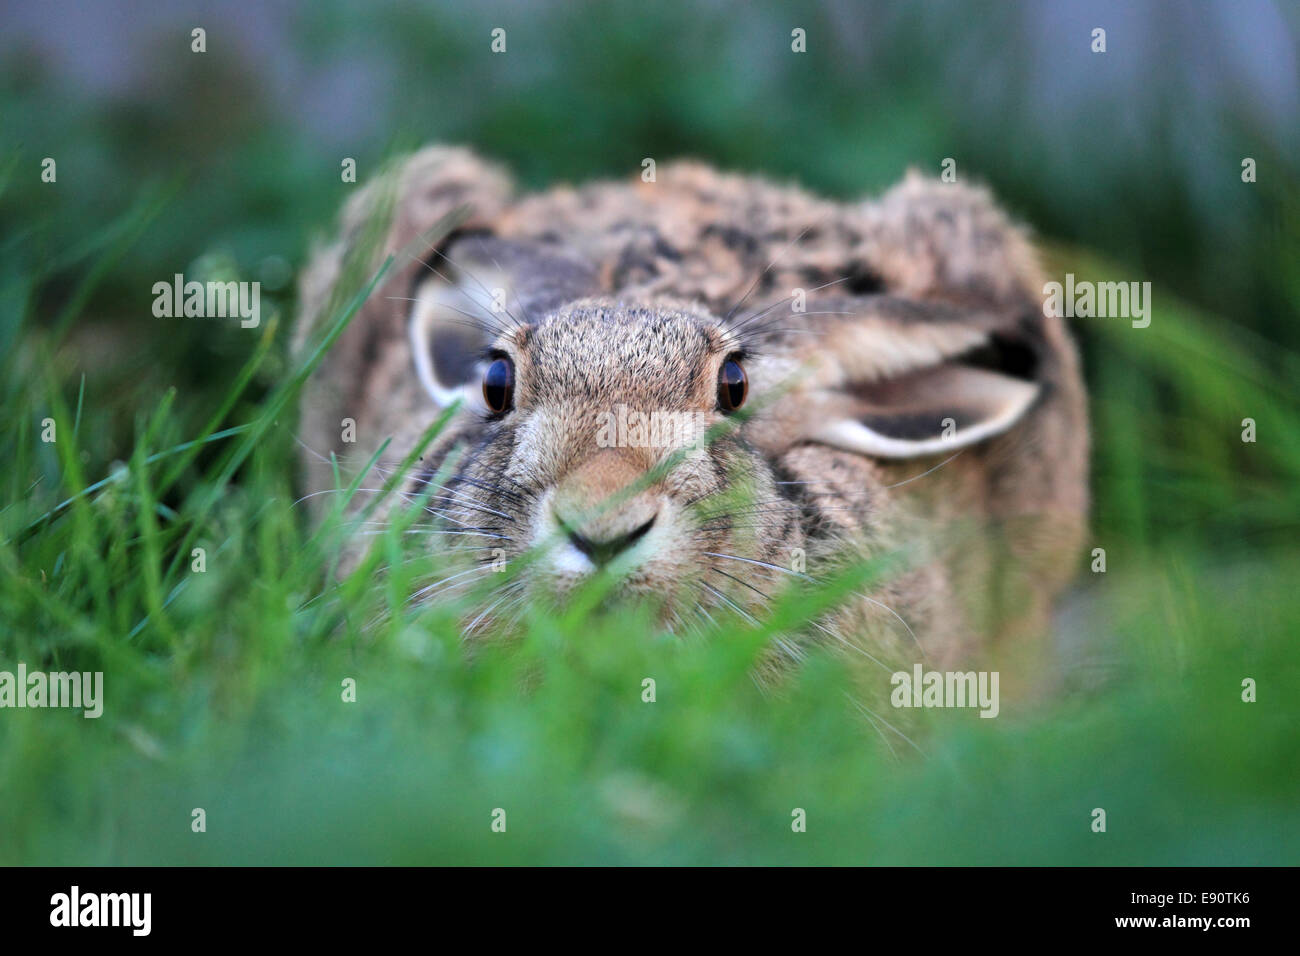 European Hare or Brown Hare Stock Photo